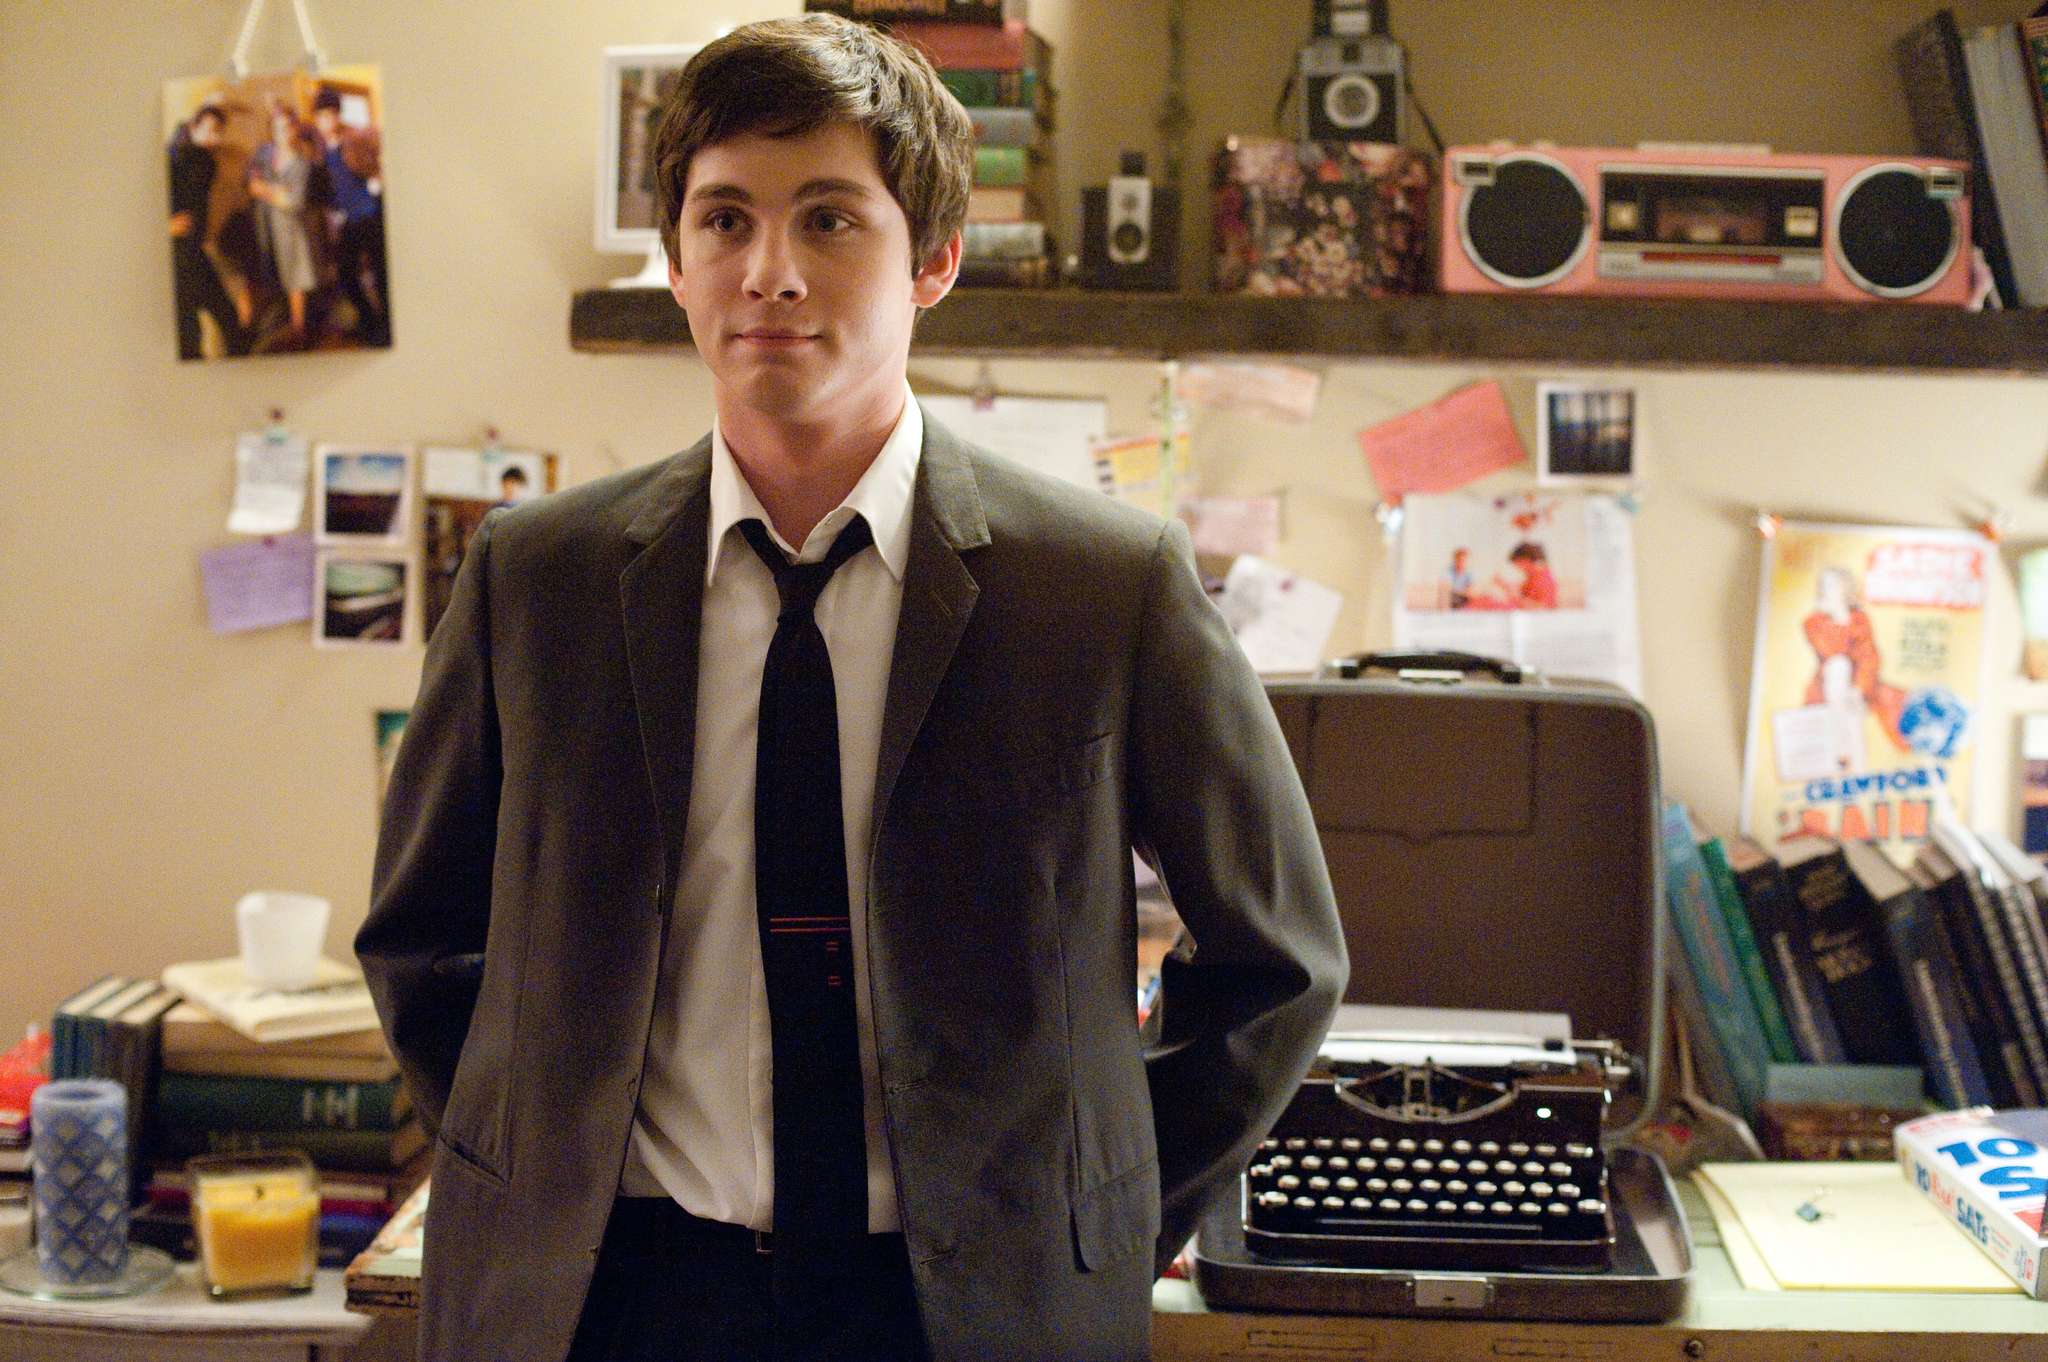 LOGAN LERMAN stars in THE PERKS OF BEING A WALLFLOWER



Ph: John Bramley

© 2011 Summit Entertainment, LLC.  All rights reserved.